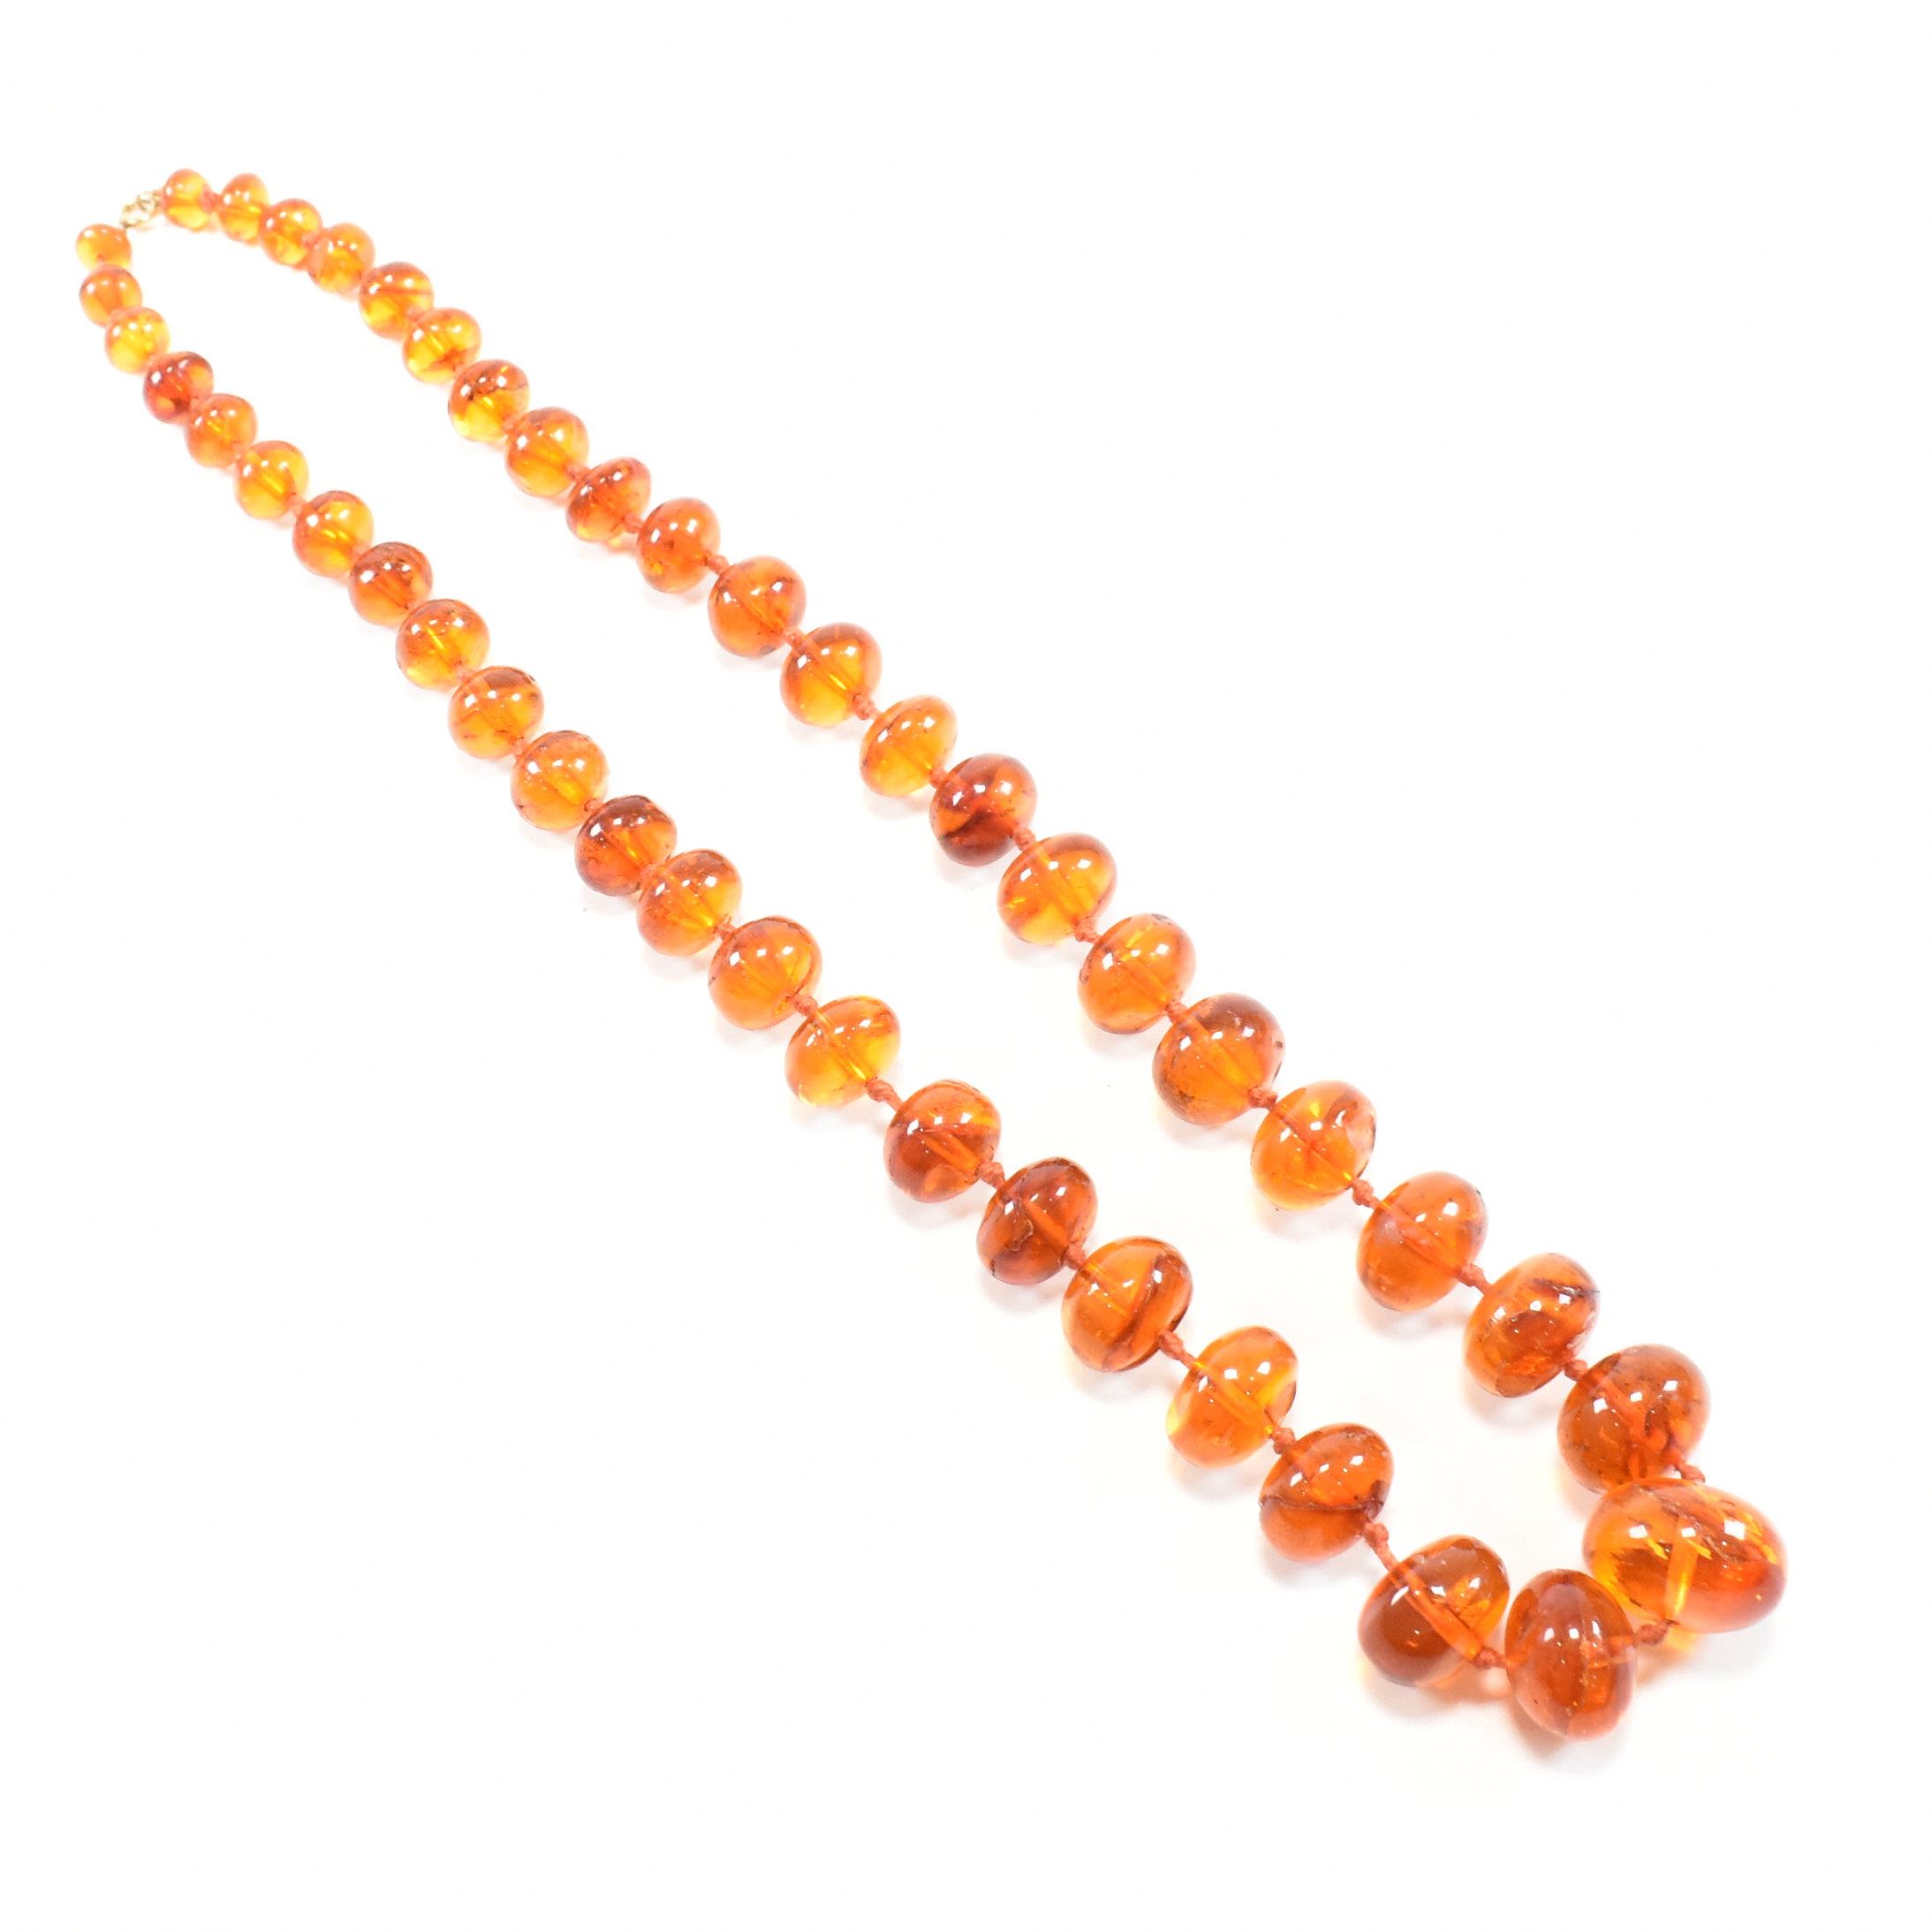 VINTAGE AMBER COPAL BEADED NECKLACE - Image 3 of 6